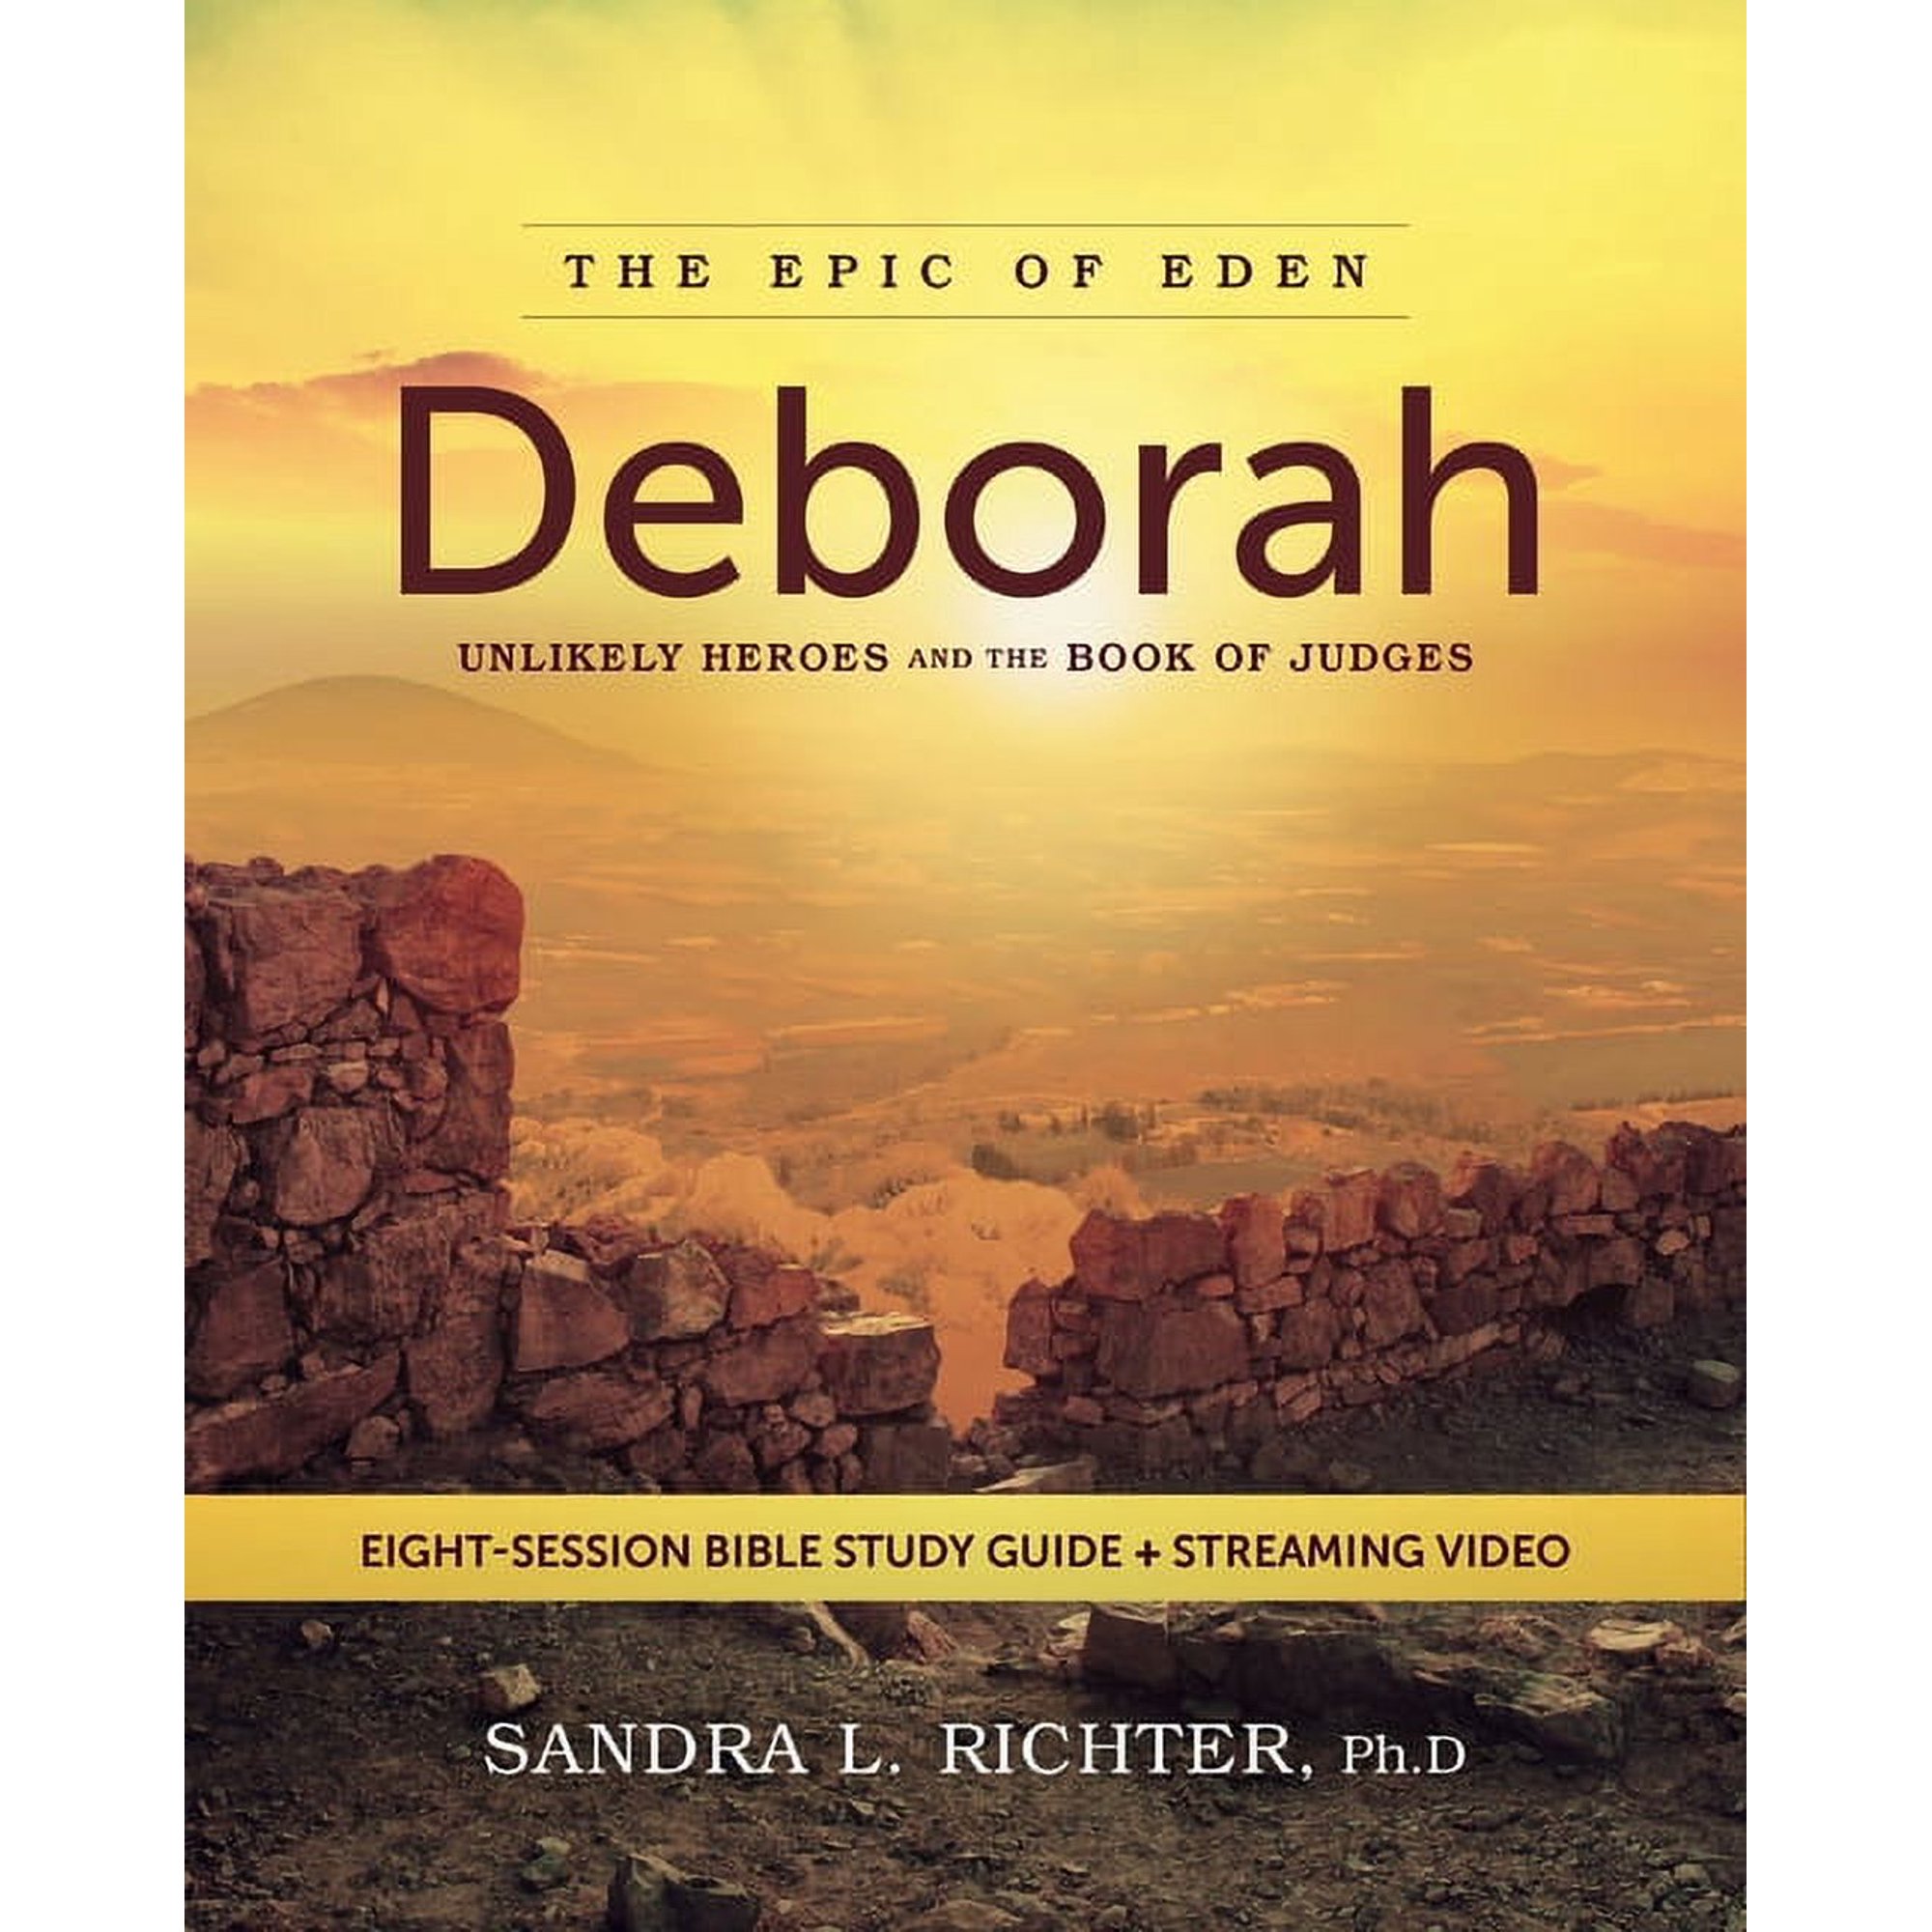 The-Epic-of-Eden-Deborah-Bible-Study-Guide-Plus-Streaming-Video-Unlikely-Heroes-and-the-Book-of-Judges-Paperback-9780310166498_3230cf34-ba69-4ce7-b.jpeg